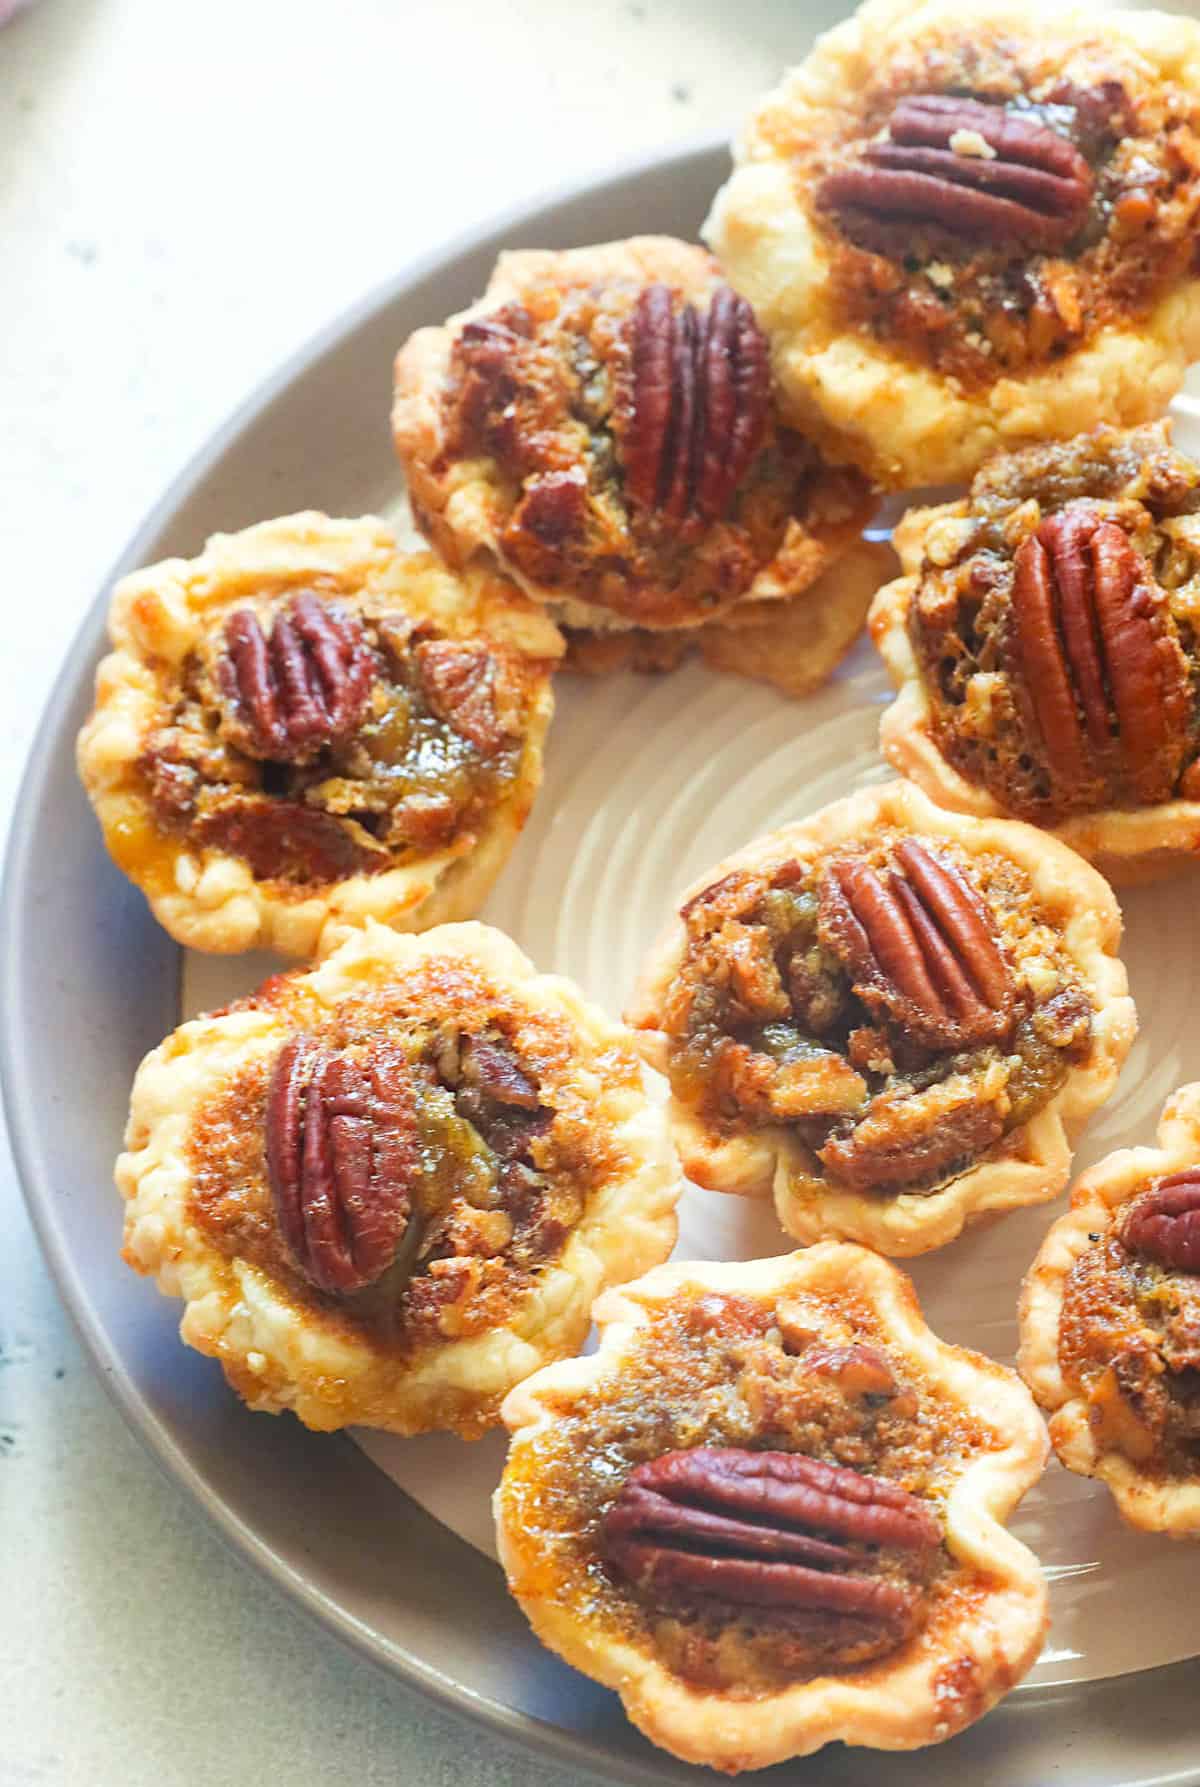 Bite into classic Southern mini pecan pies for genuine comfort